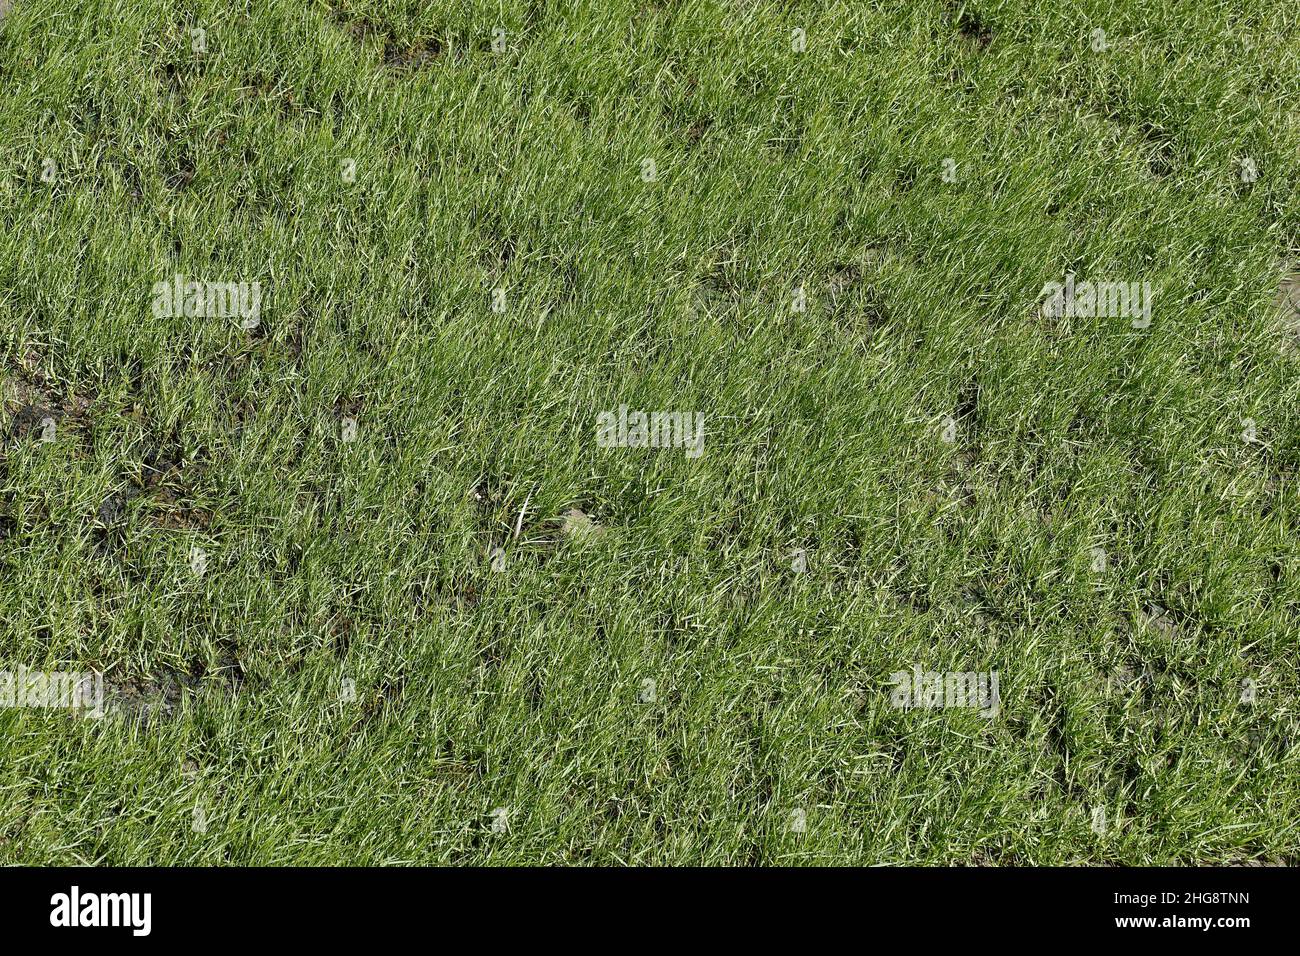 Green lawn, background image, Germany, Europe Stock Photo